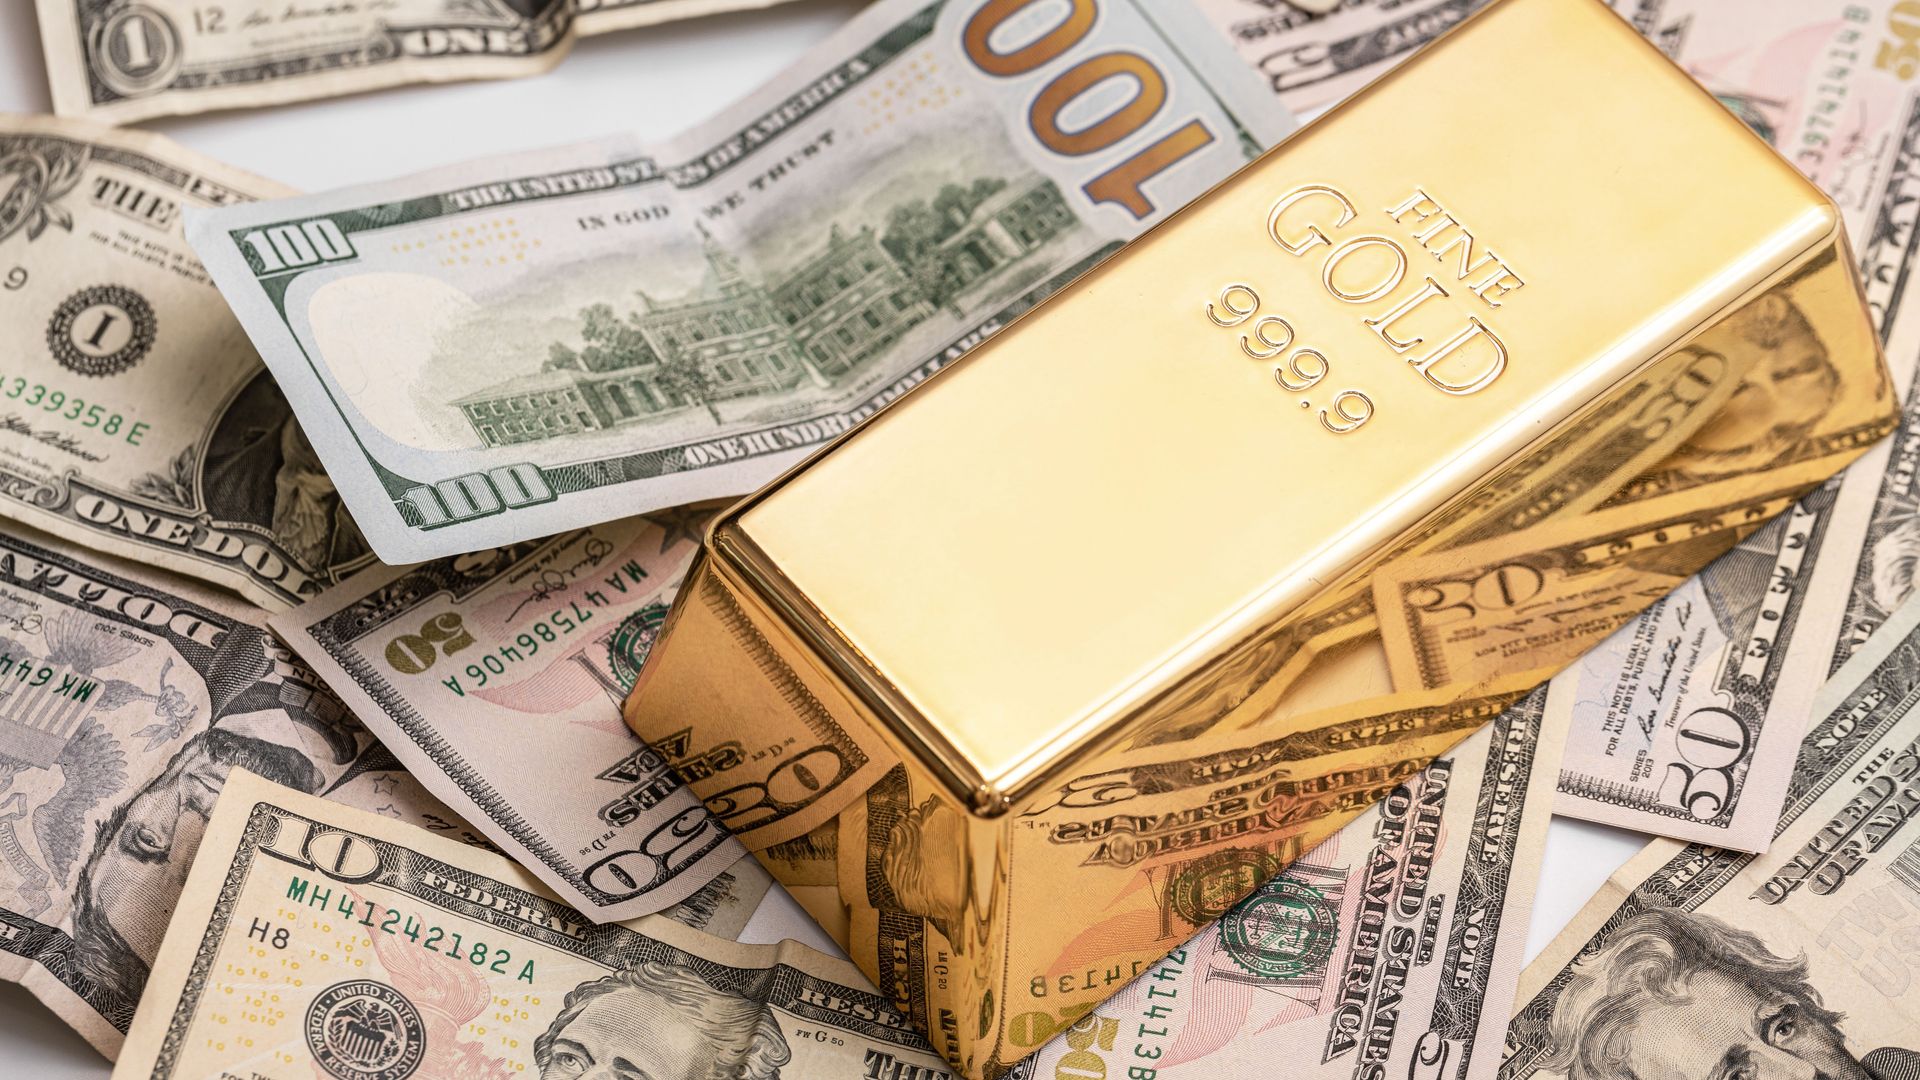 China’s equity slide is supercharging gold demand, new USD highs could come in April - GSC Commodity Intelligence’s Carr teaser image